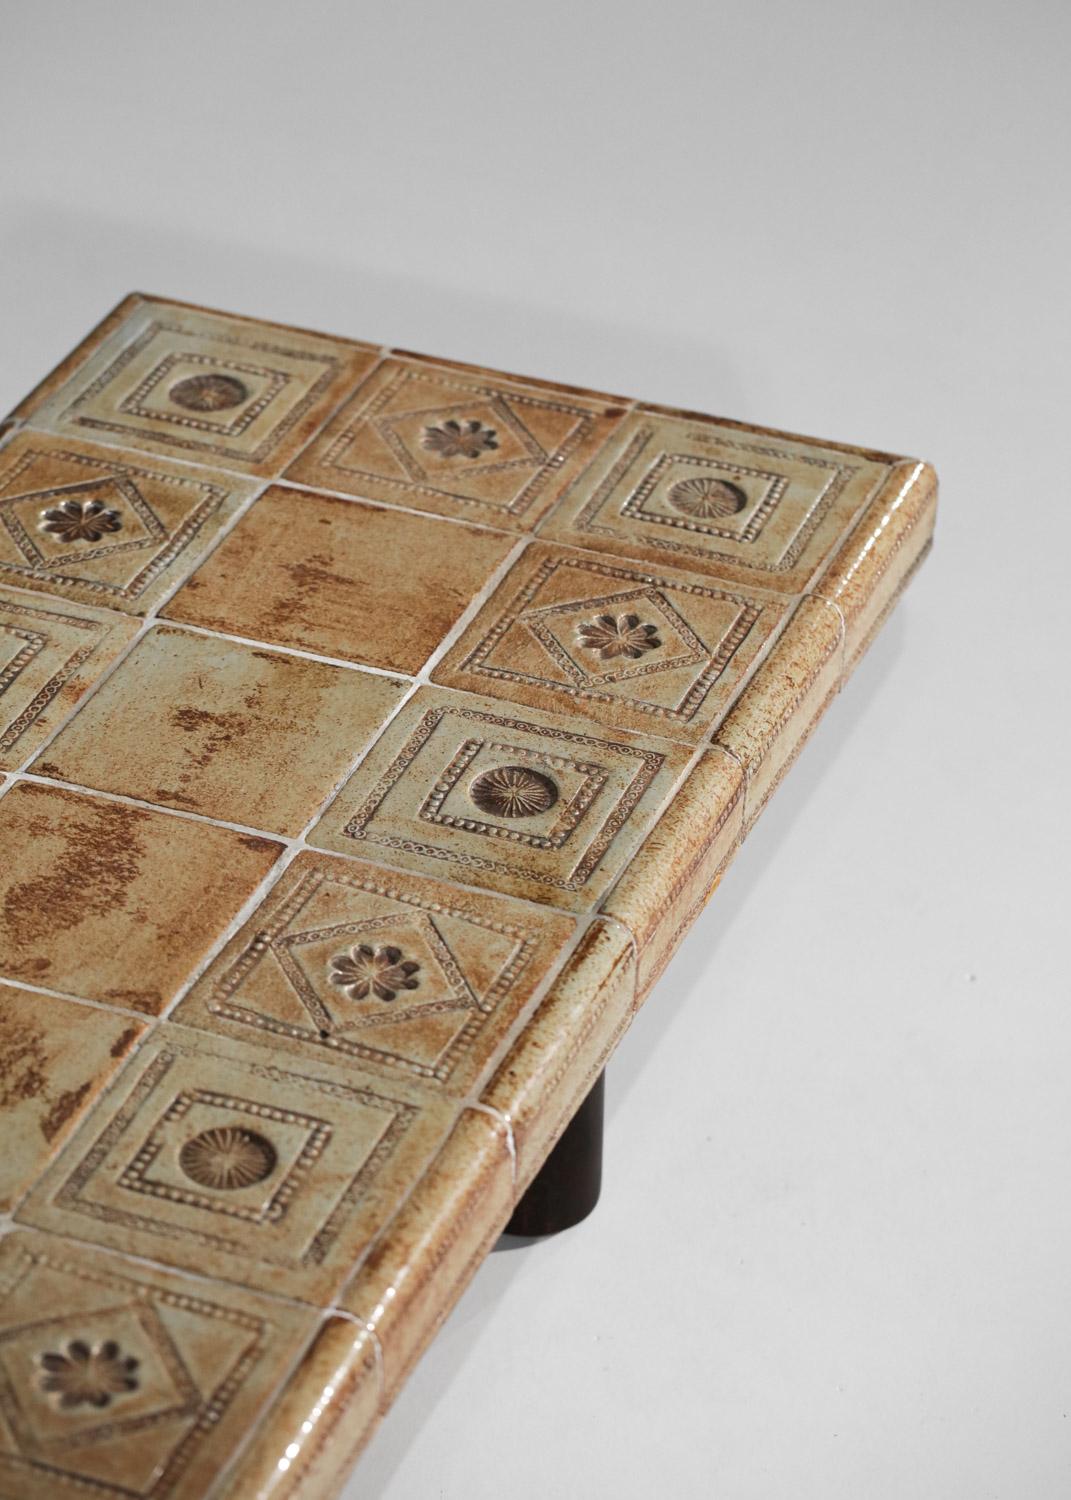 French Coffee Table by Roger Capron Vintage Ceramic Vallauris 1960s Tiles Derval For Sale